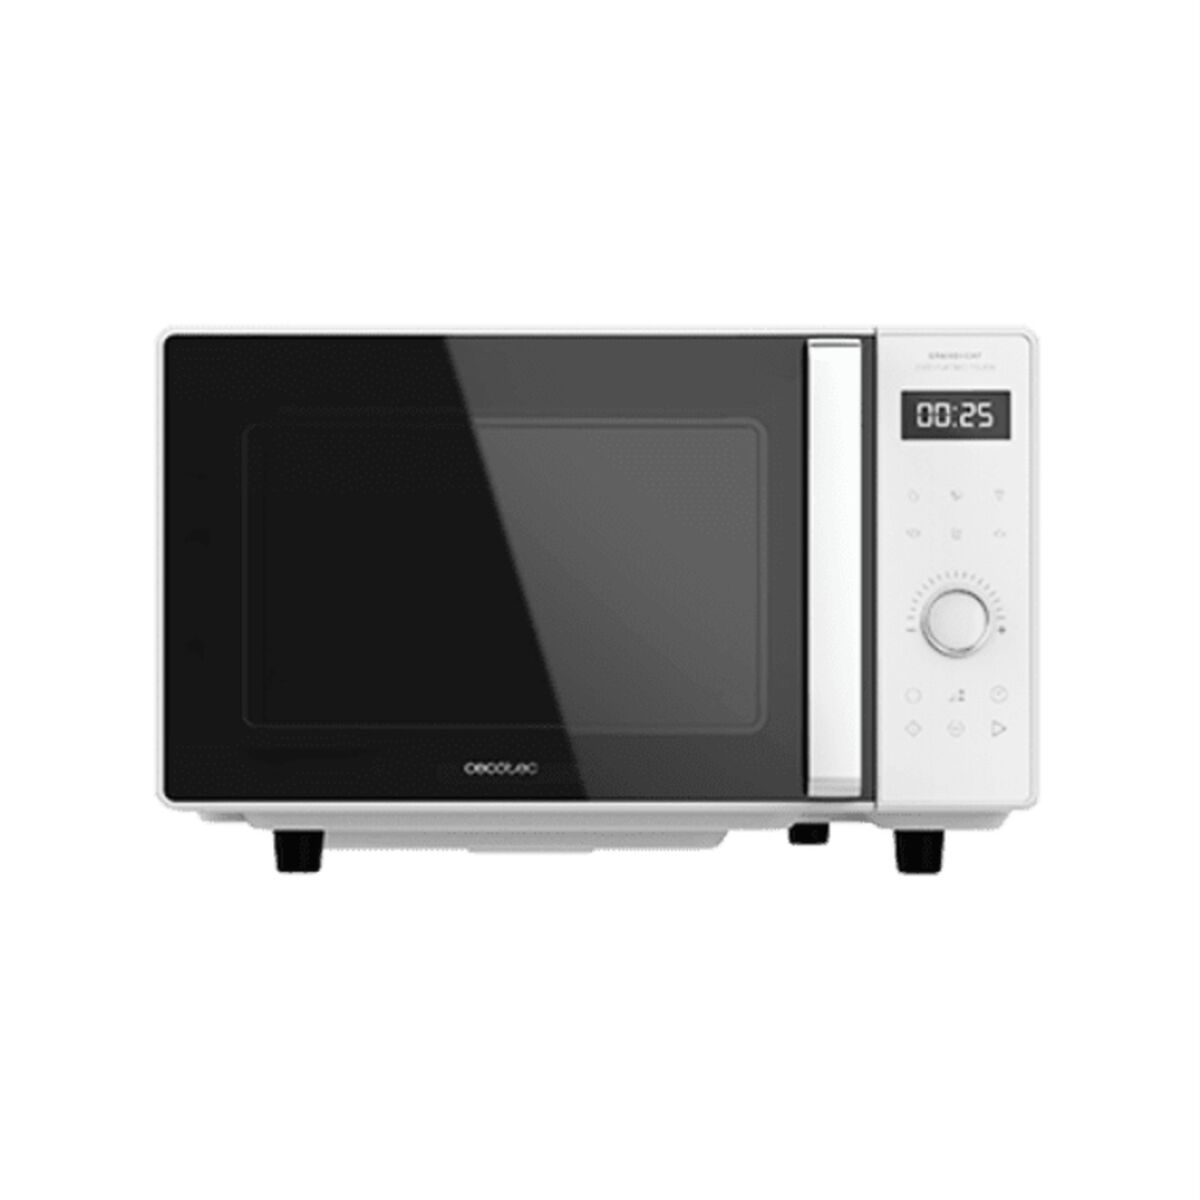 Taurus Microwave Ready Black Grill, Microwave ovens